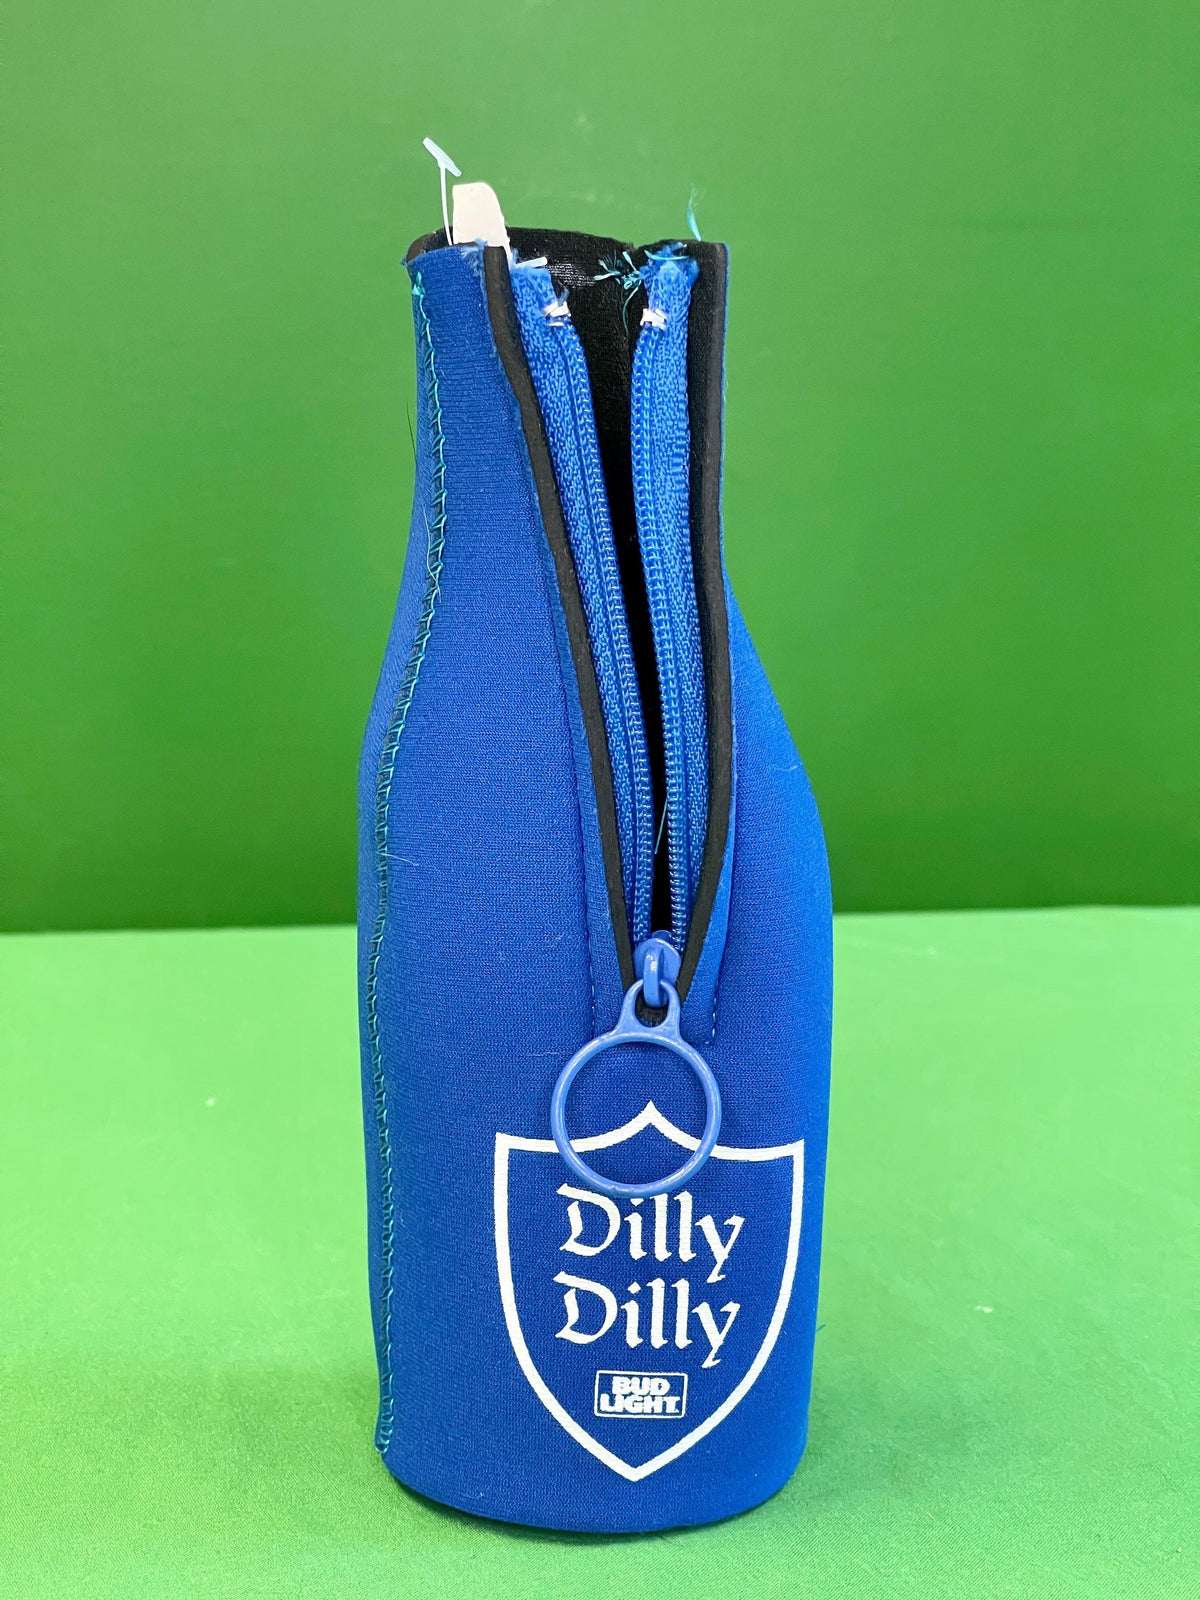 NFL Bud Light "Dilly Dilly" Bottle Cooler Cosy Jersey Neoprene NWT